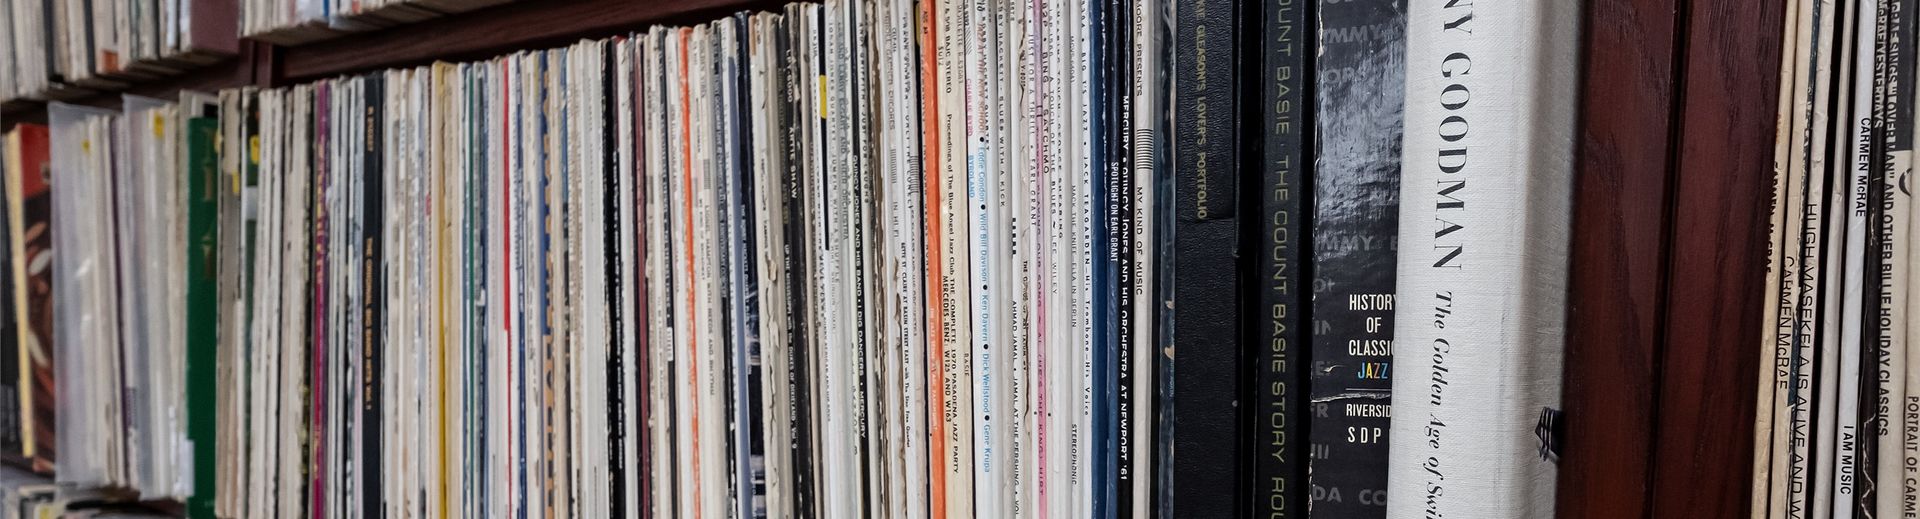 Shelves of records in the music library.